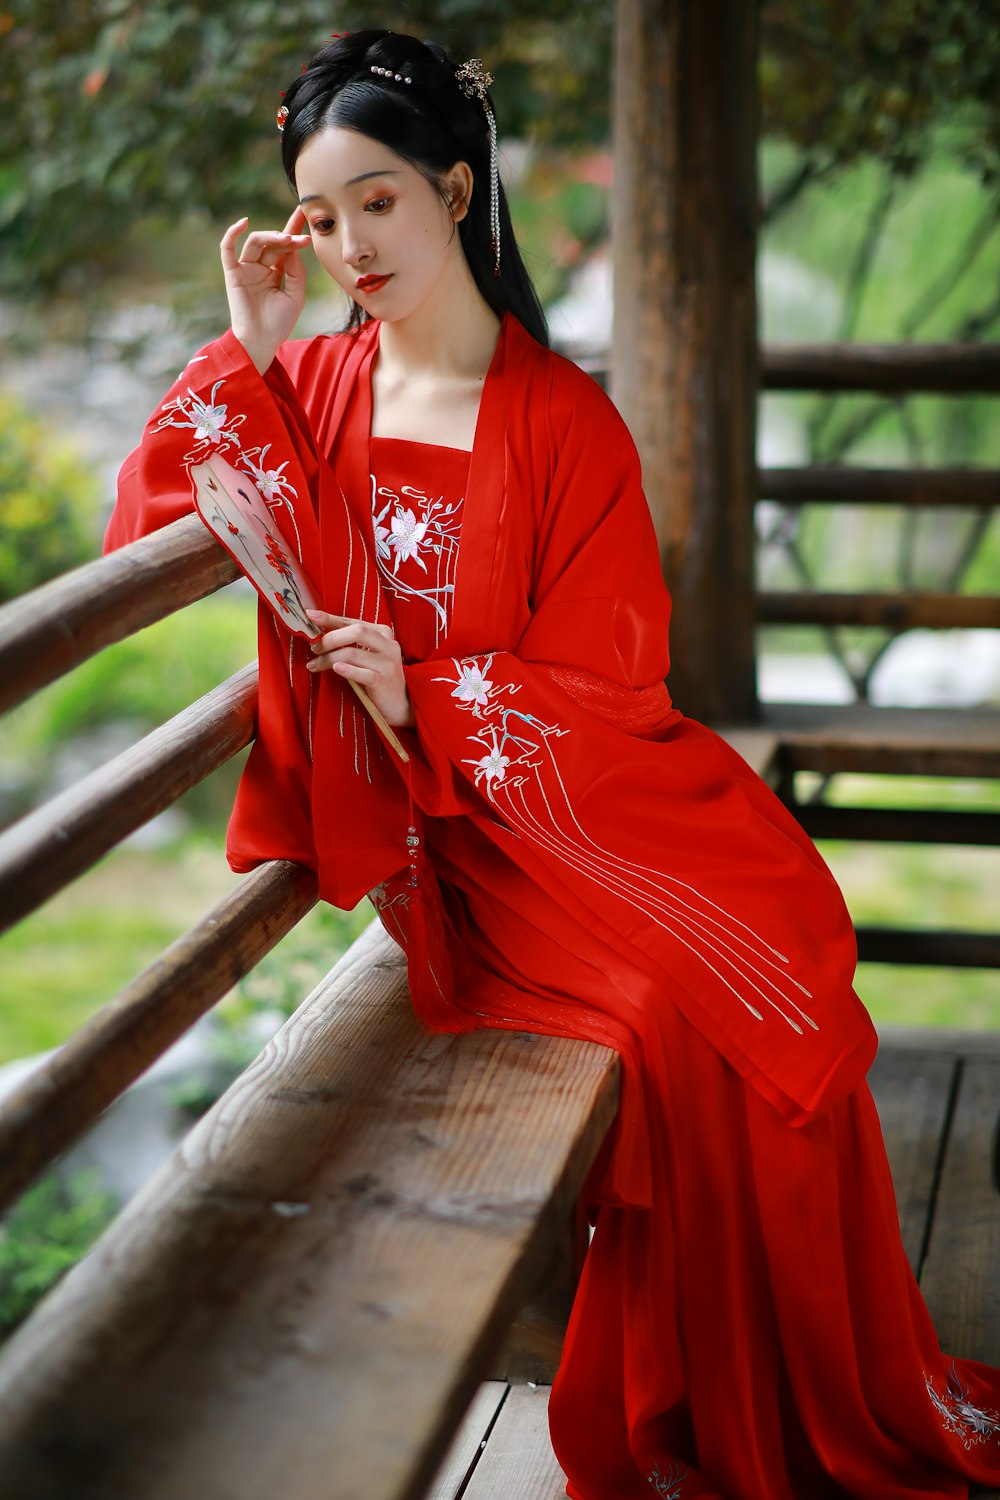 woman in red and white floral kimono sitting on brown wooden bench during daytime